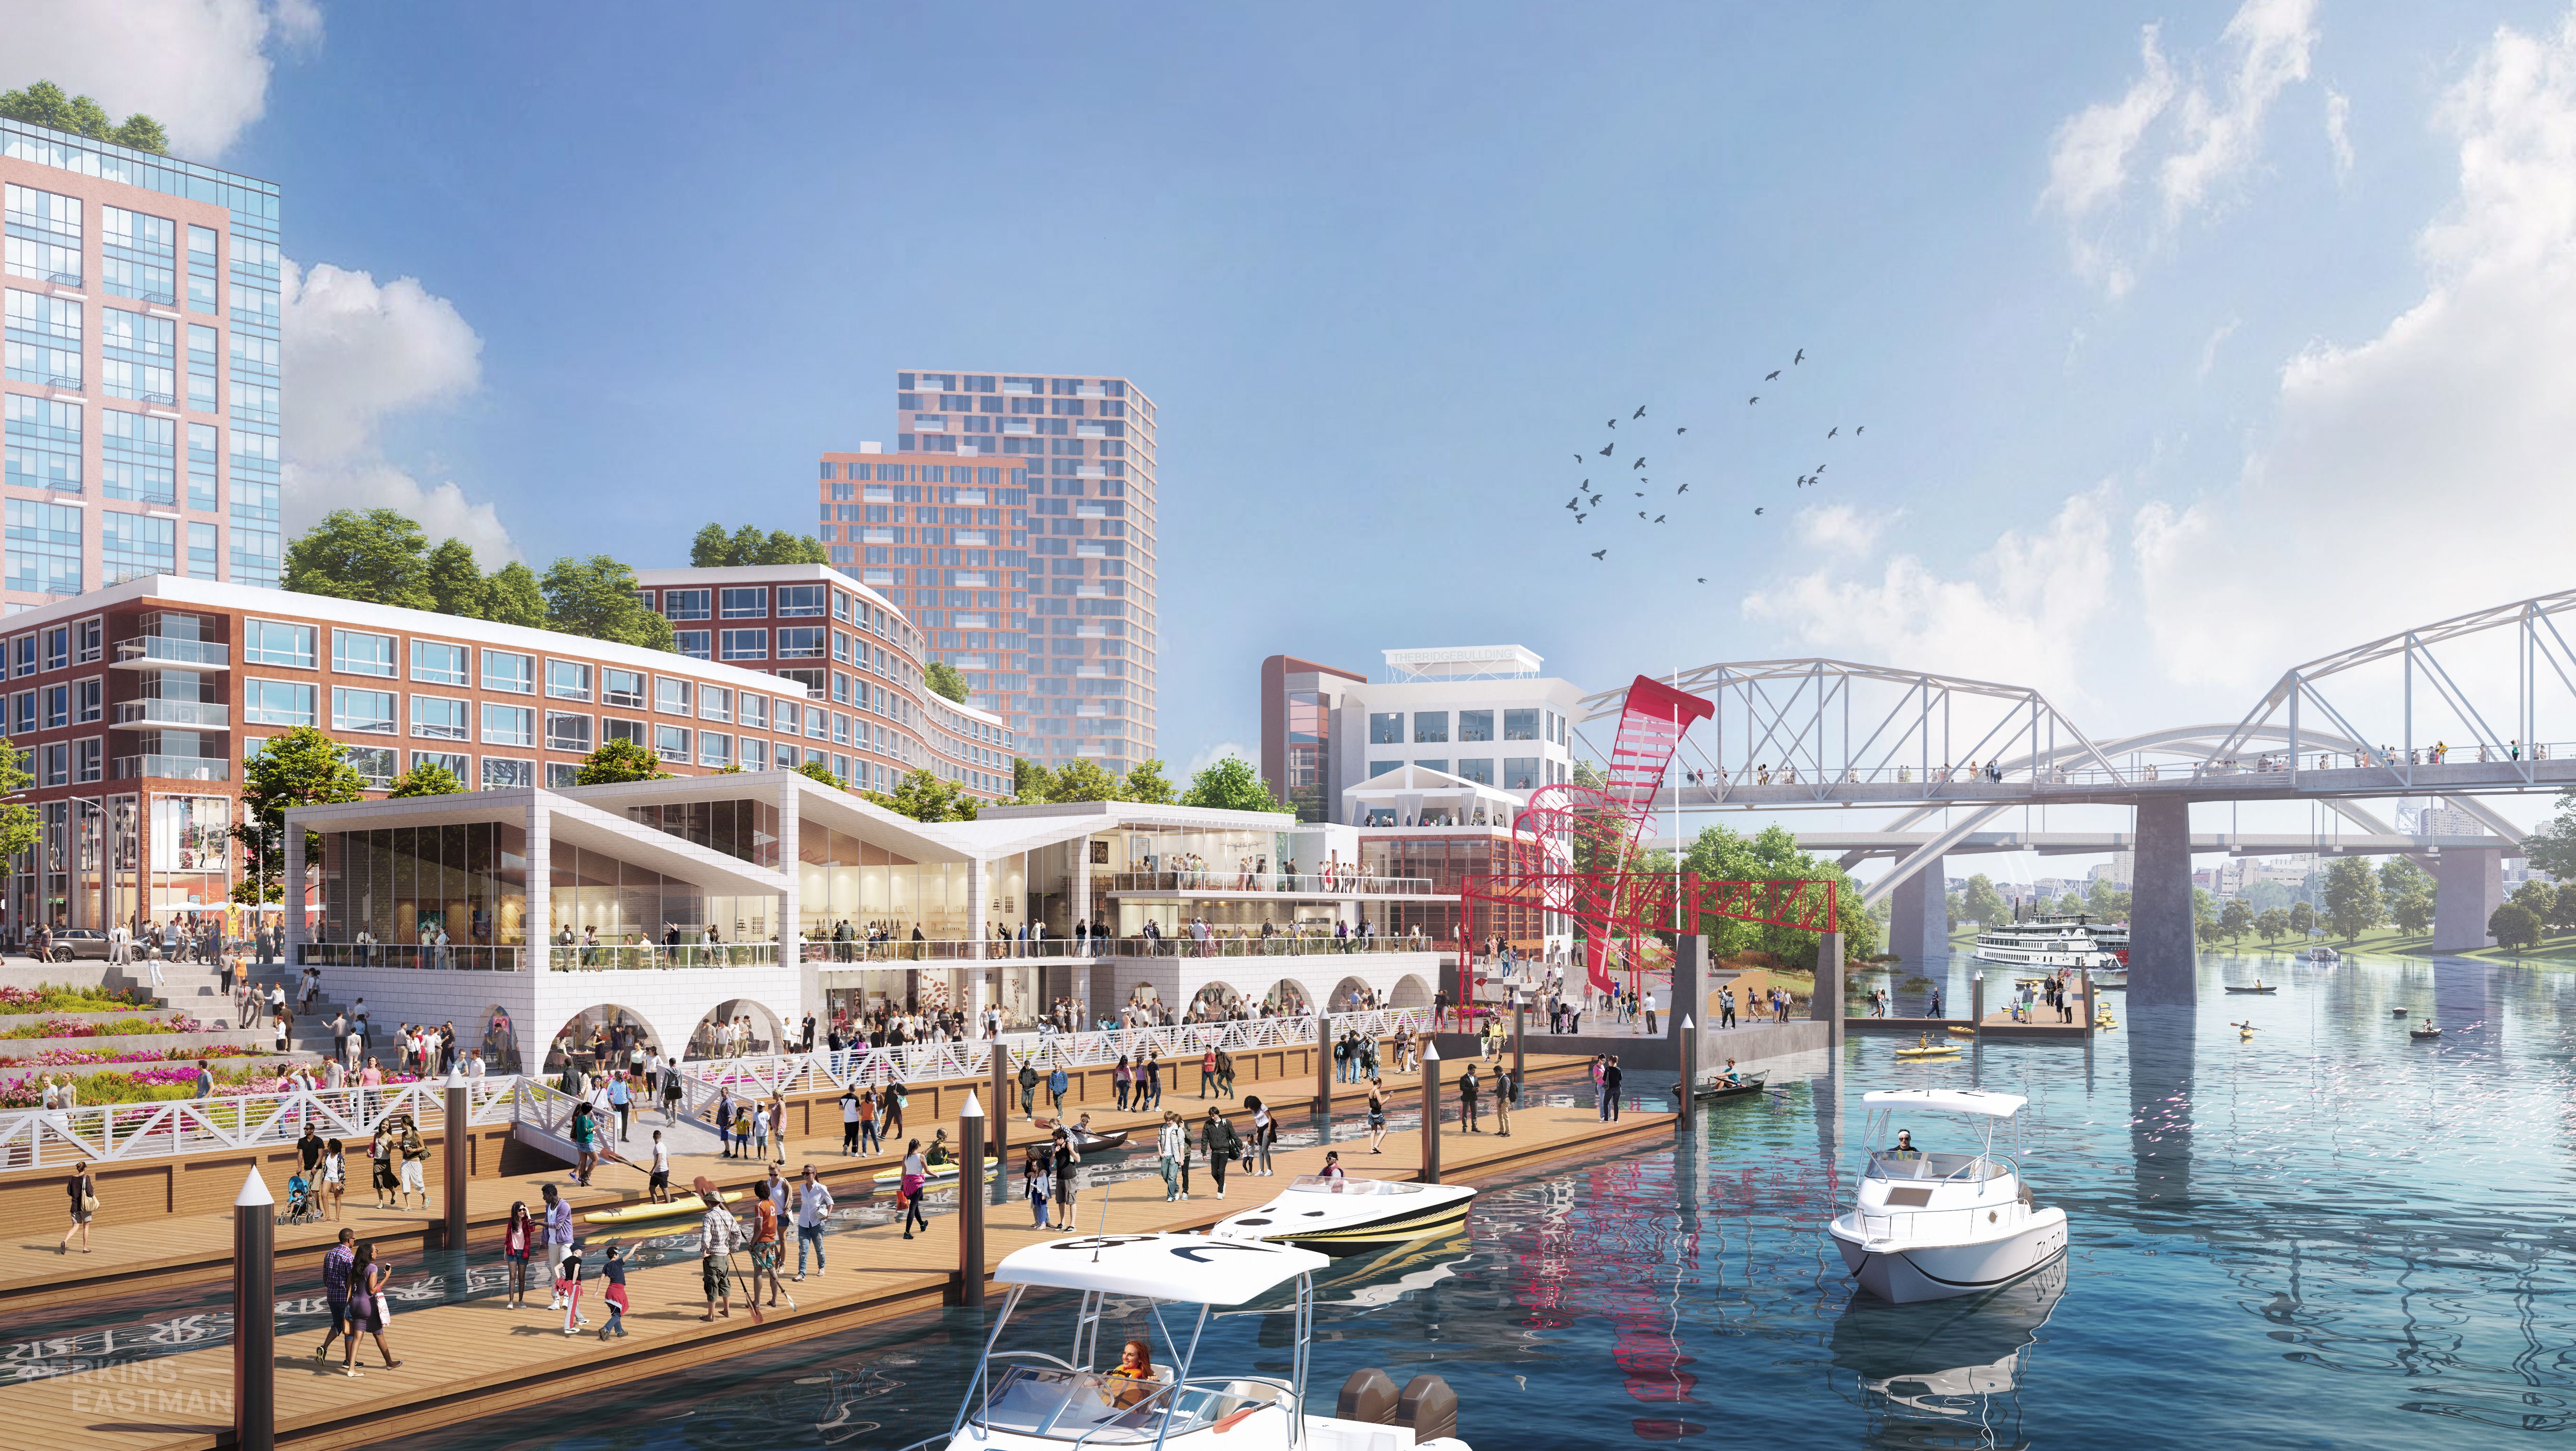 A rendering of the vision for the waterfront on the East Bank.